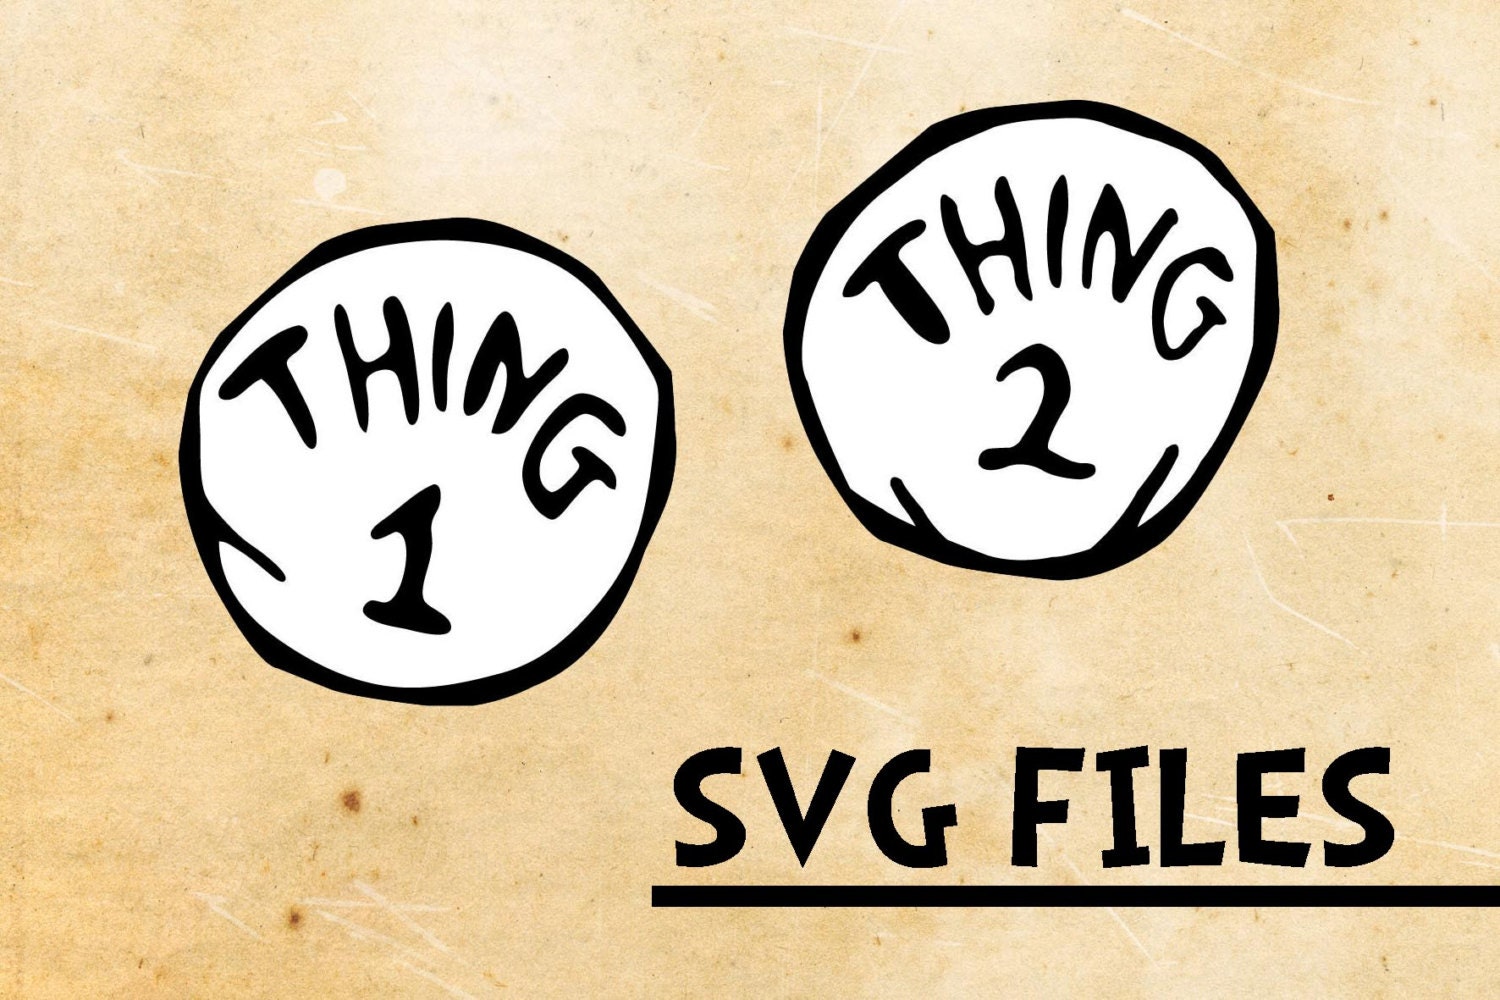 Download Dr Seuss SVG files thing 1 & thing 2 instant by ...